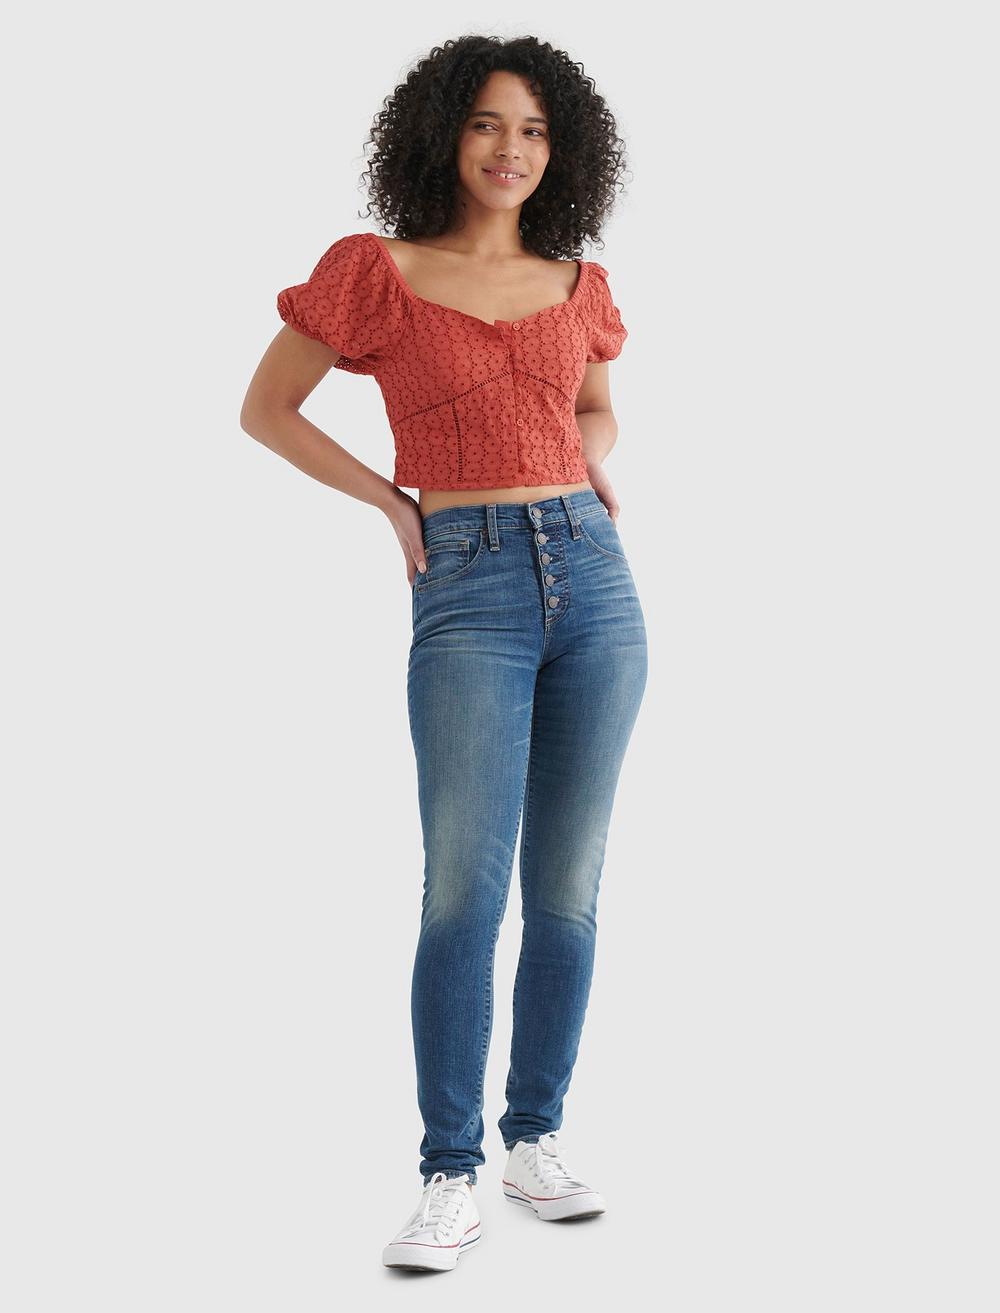 LACE SWEETHEART CROP TOP, image 1